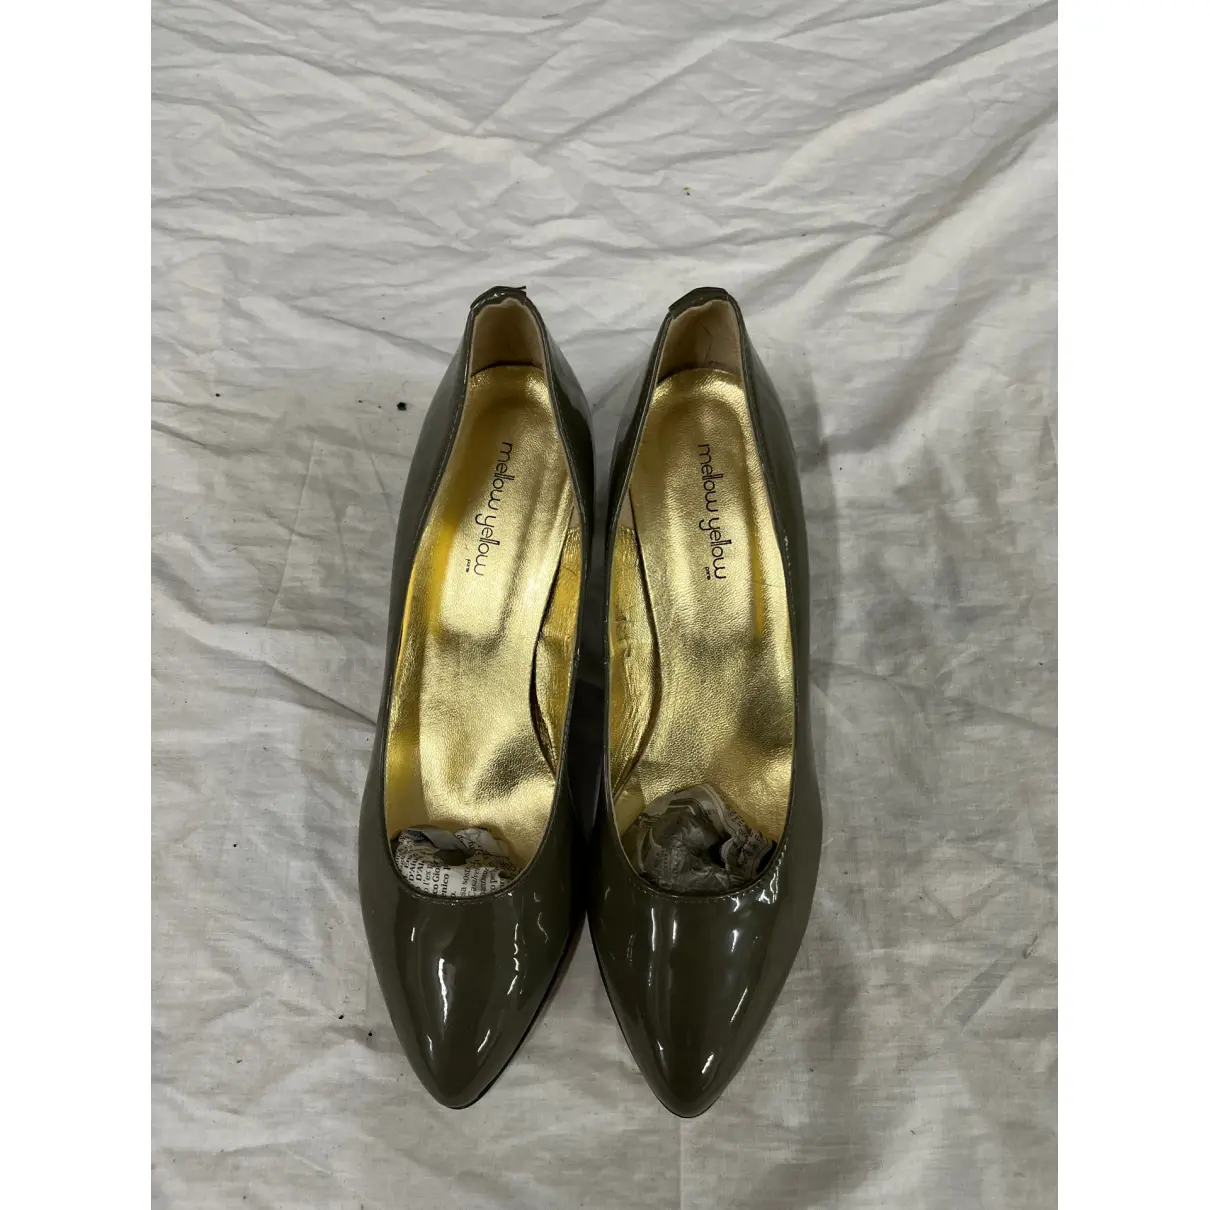 Buy Mellow Yellow Patent leather heels online